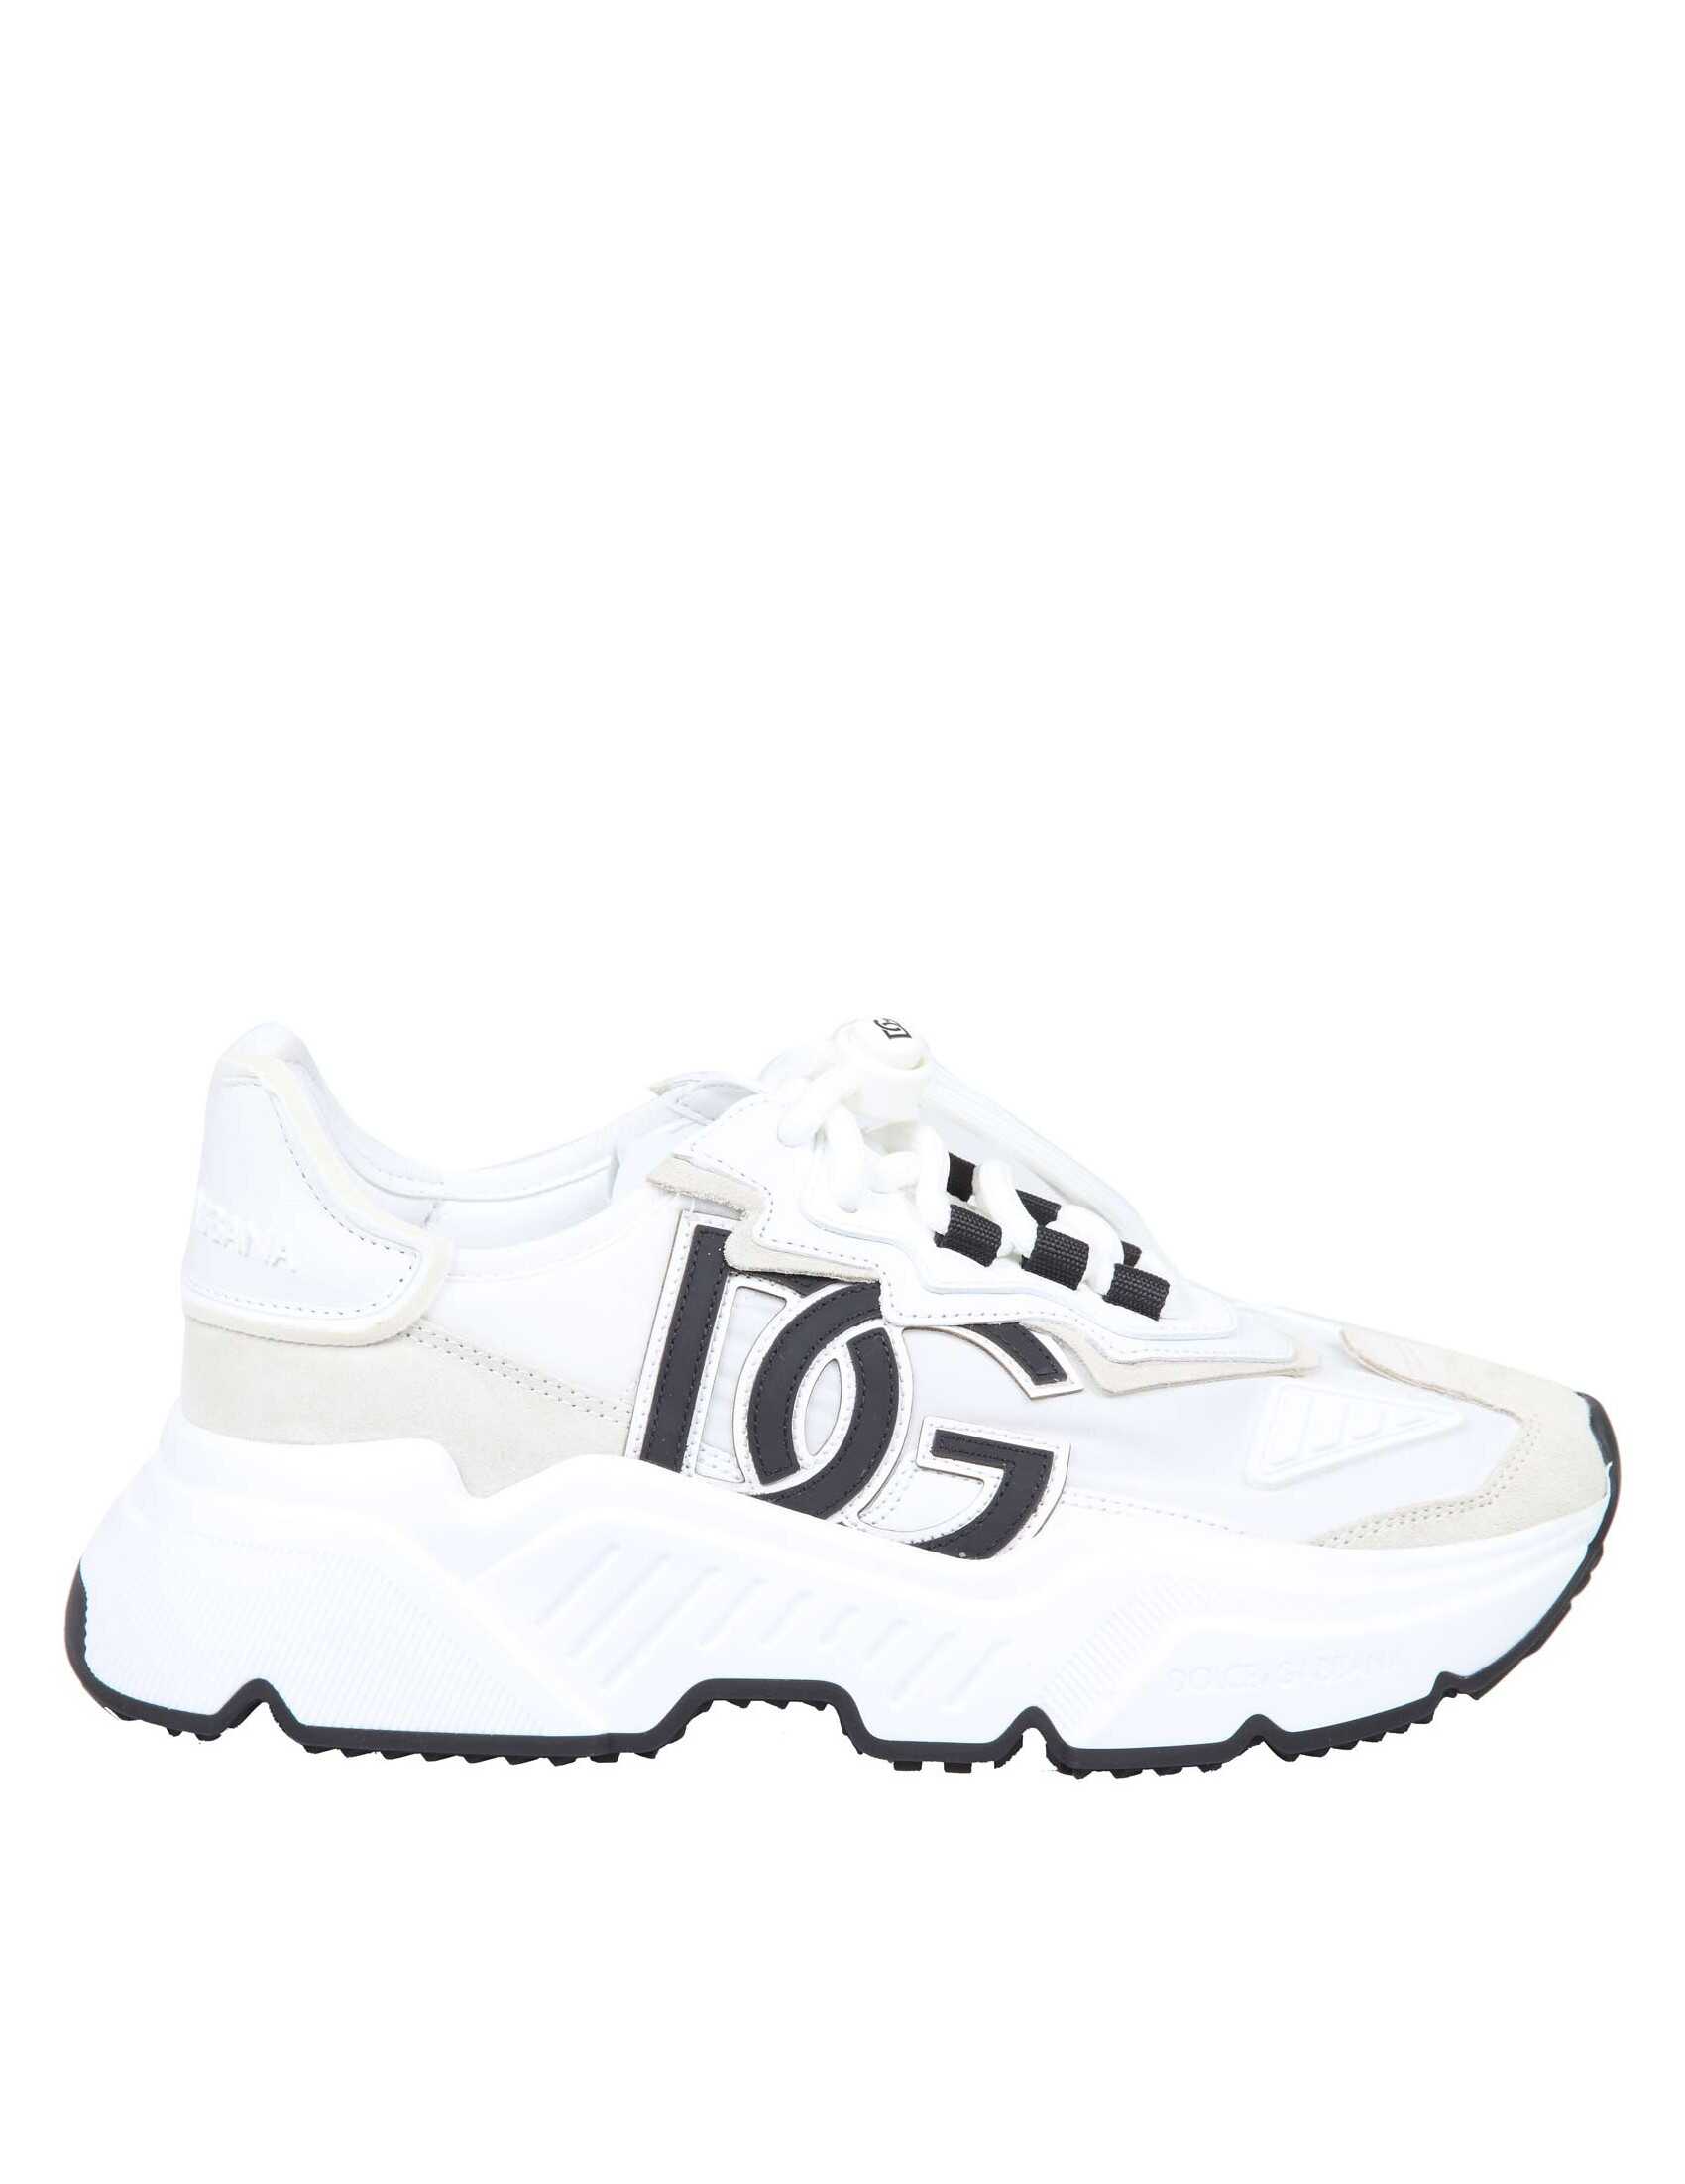 Dolce & Gabbana daymaster sneakers in fabric and suede White image10